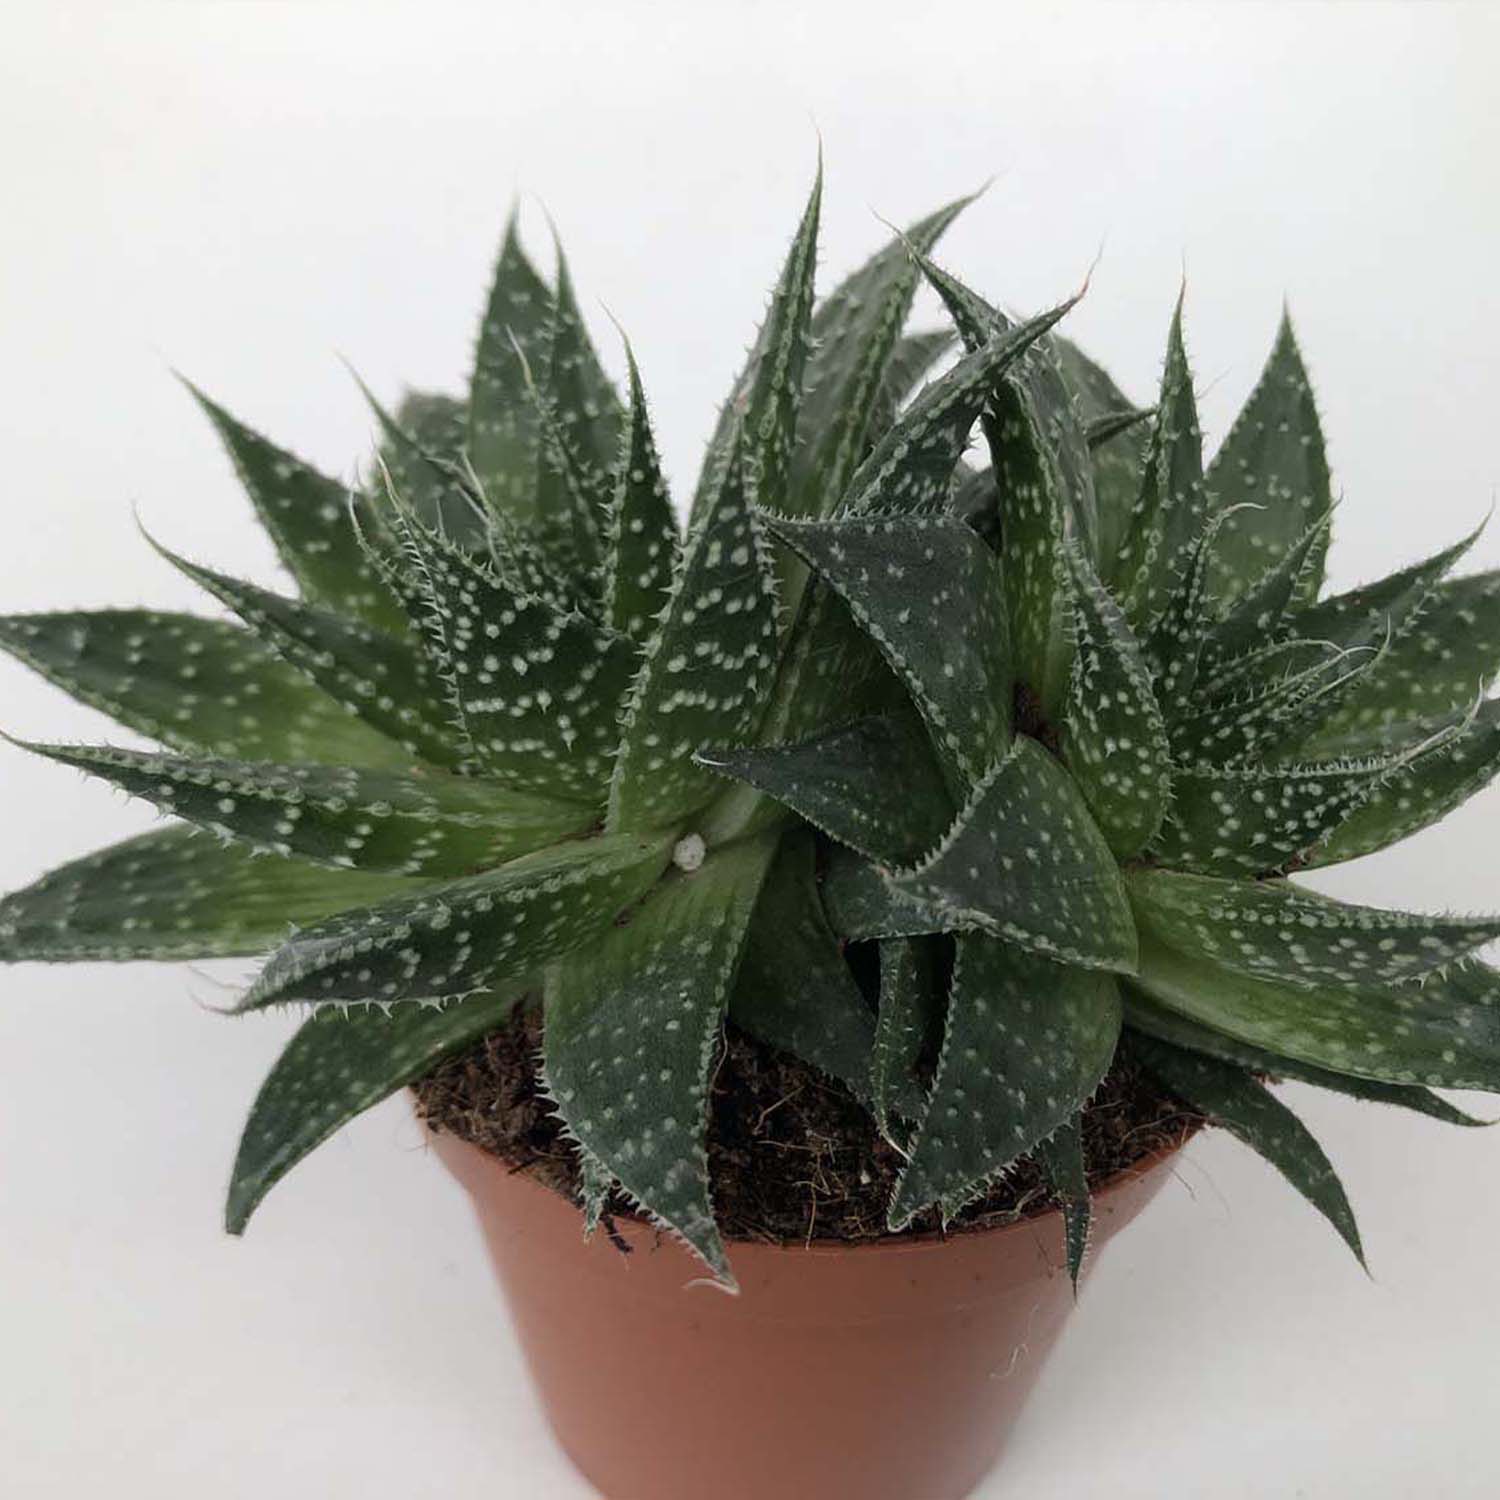 You are currently viewing Aloe aristata